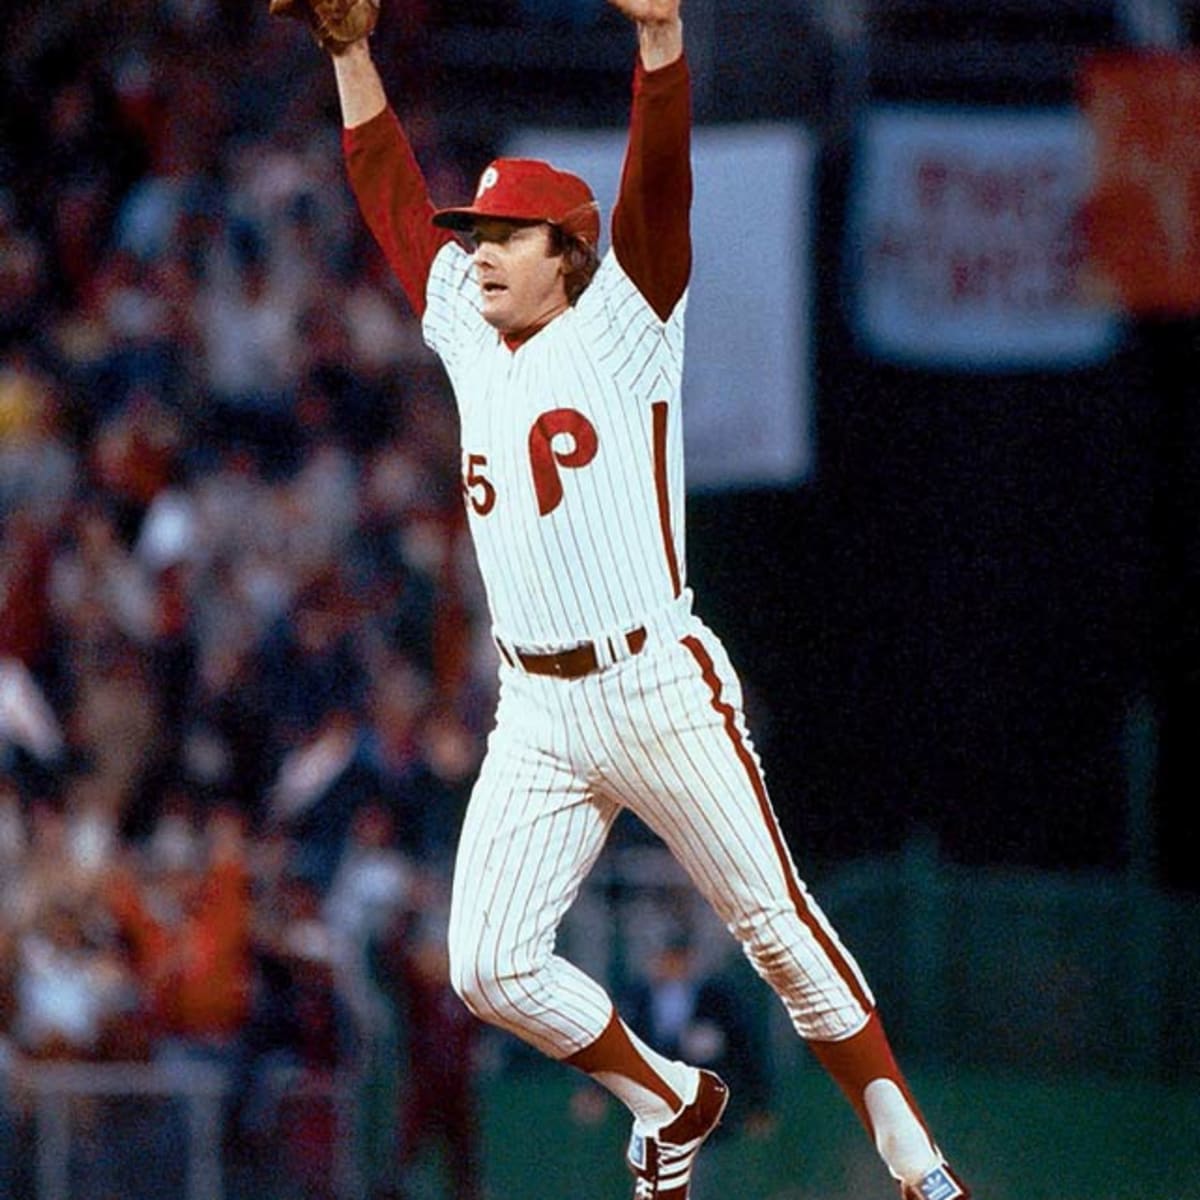 Tug McGraw strikes out Willie Wilson to close out 1980 World